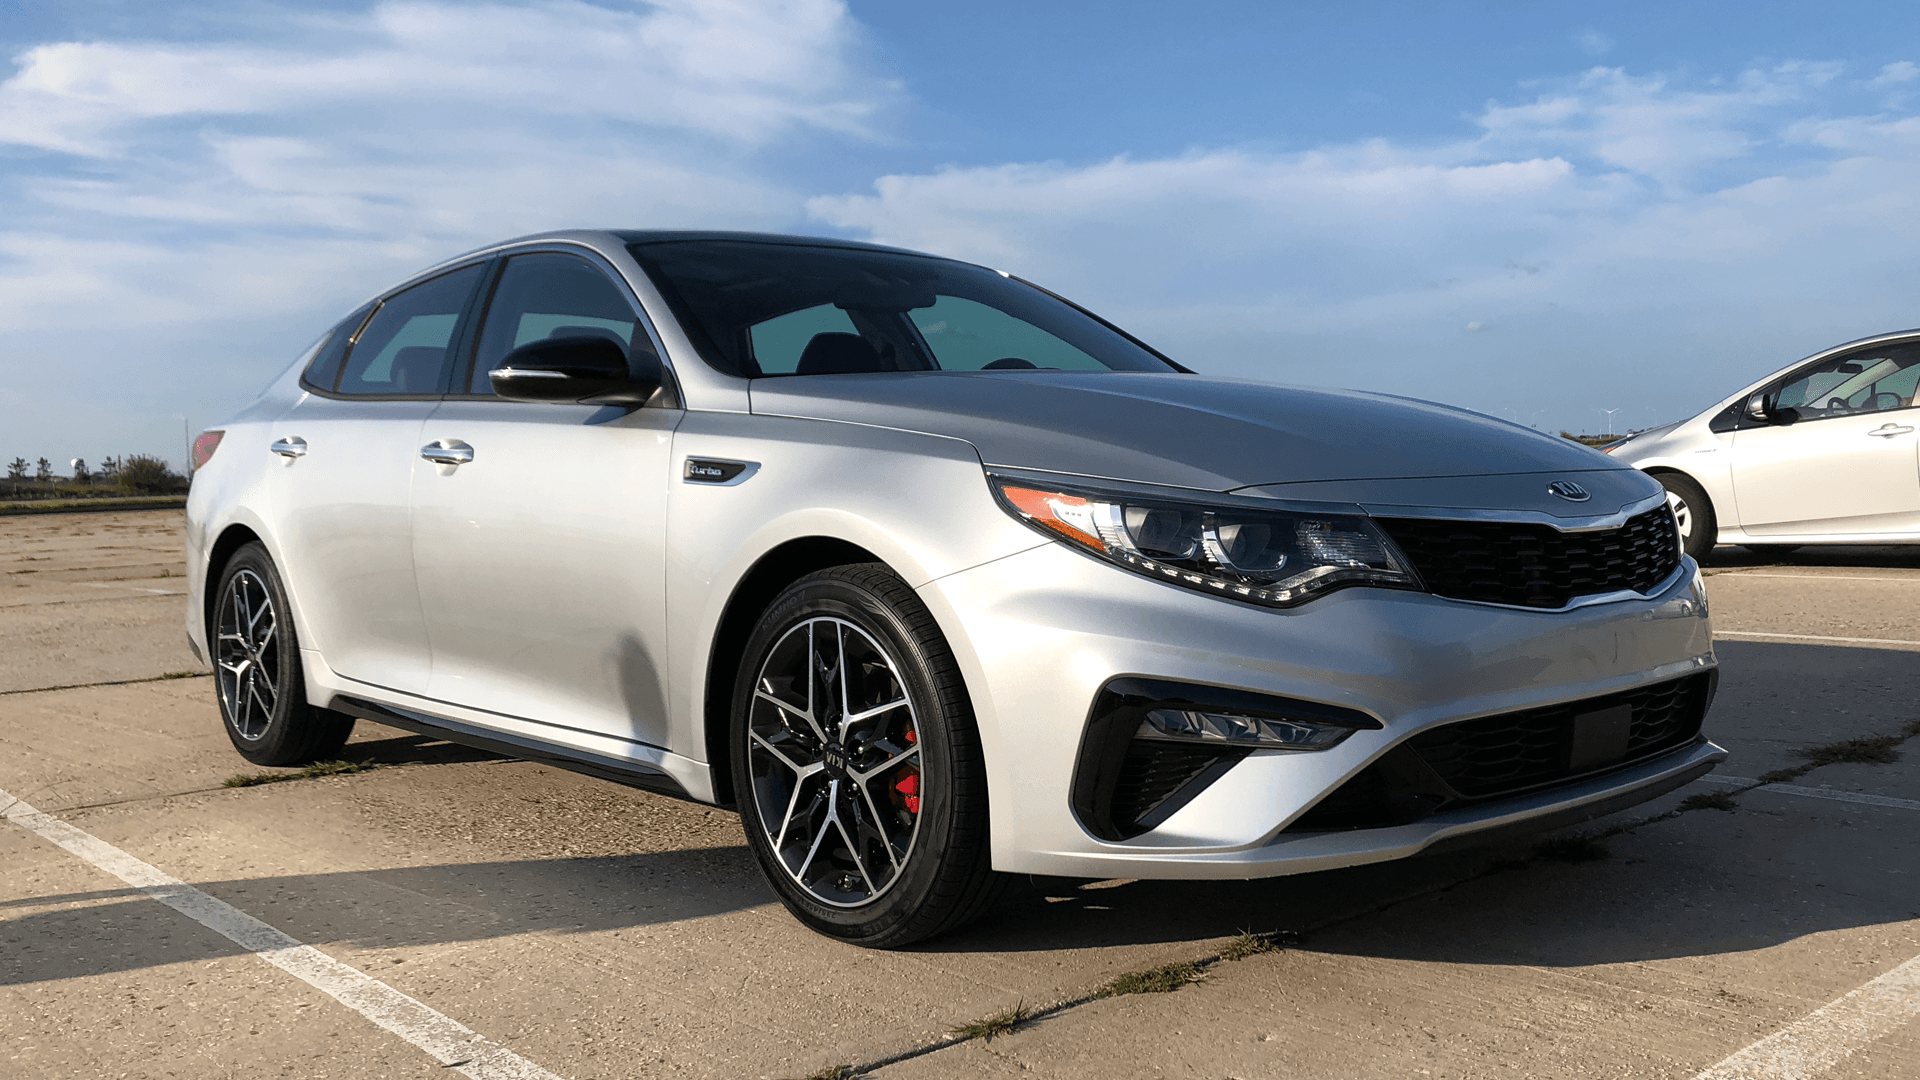 2019 Kia Optima SX Review: A Sporty Daily Driver You Could Fall in Love With